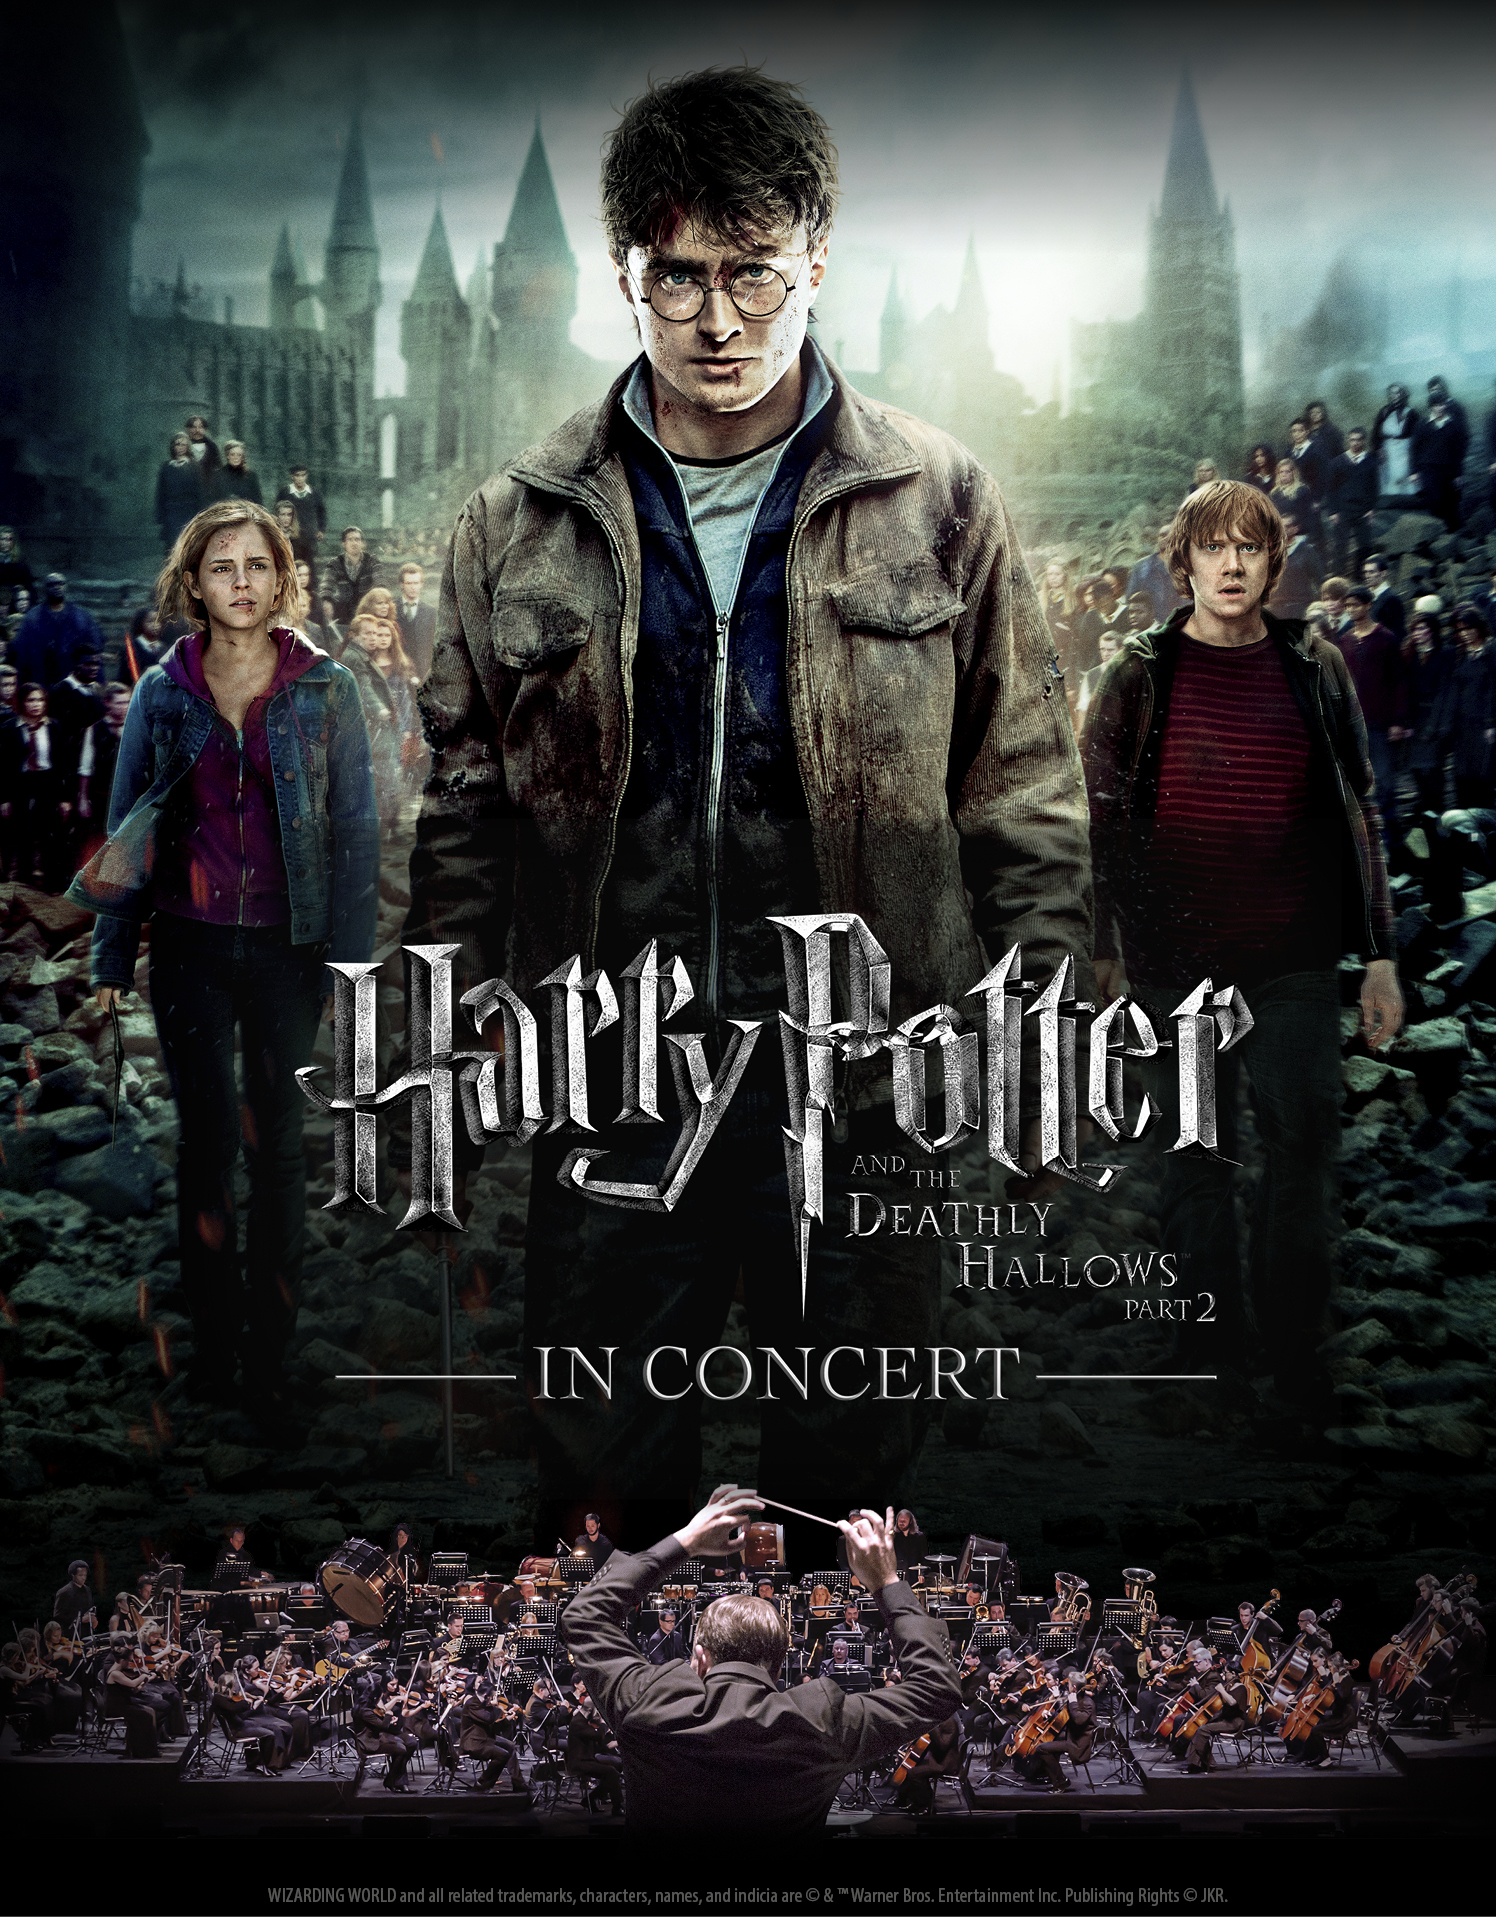 Harry Potter and the Deathly Hallows – Part 2